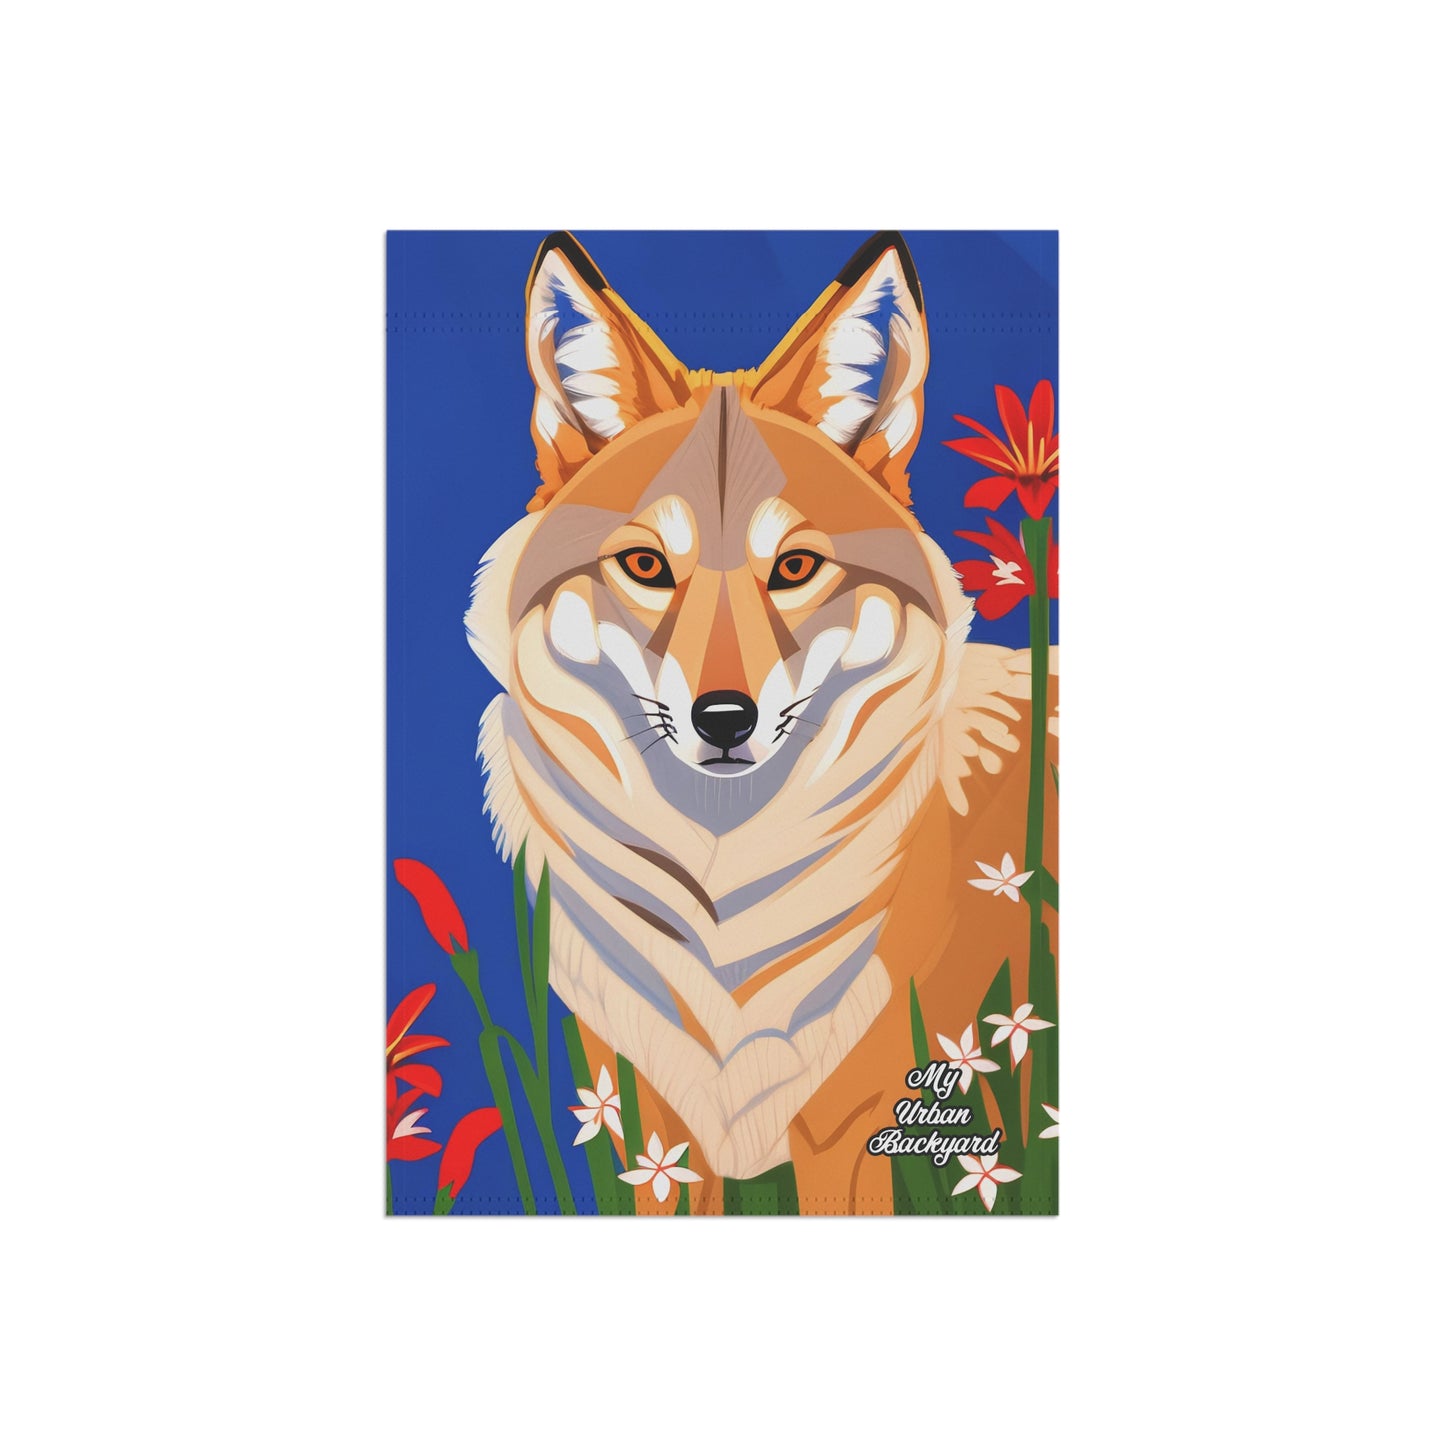 Coyote and Red Flowers, Garden Flag for Yard, Patio, Porch, or Work, 12"x18" - Flag only